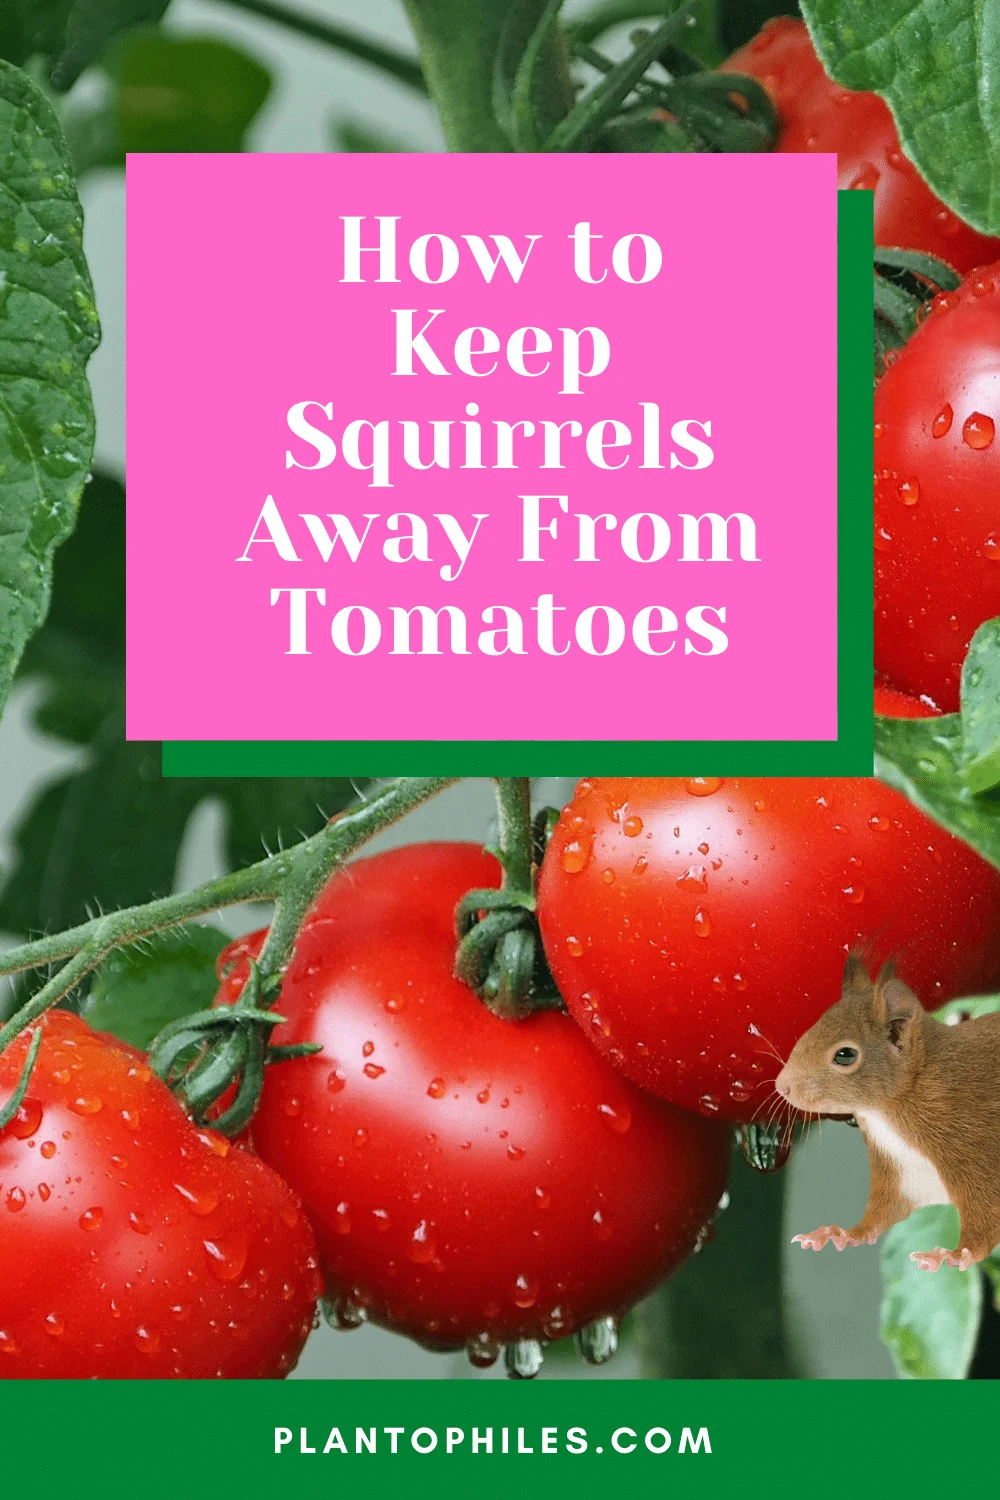 How to Keep Squirrels Away From Tomatoes